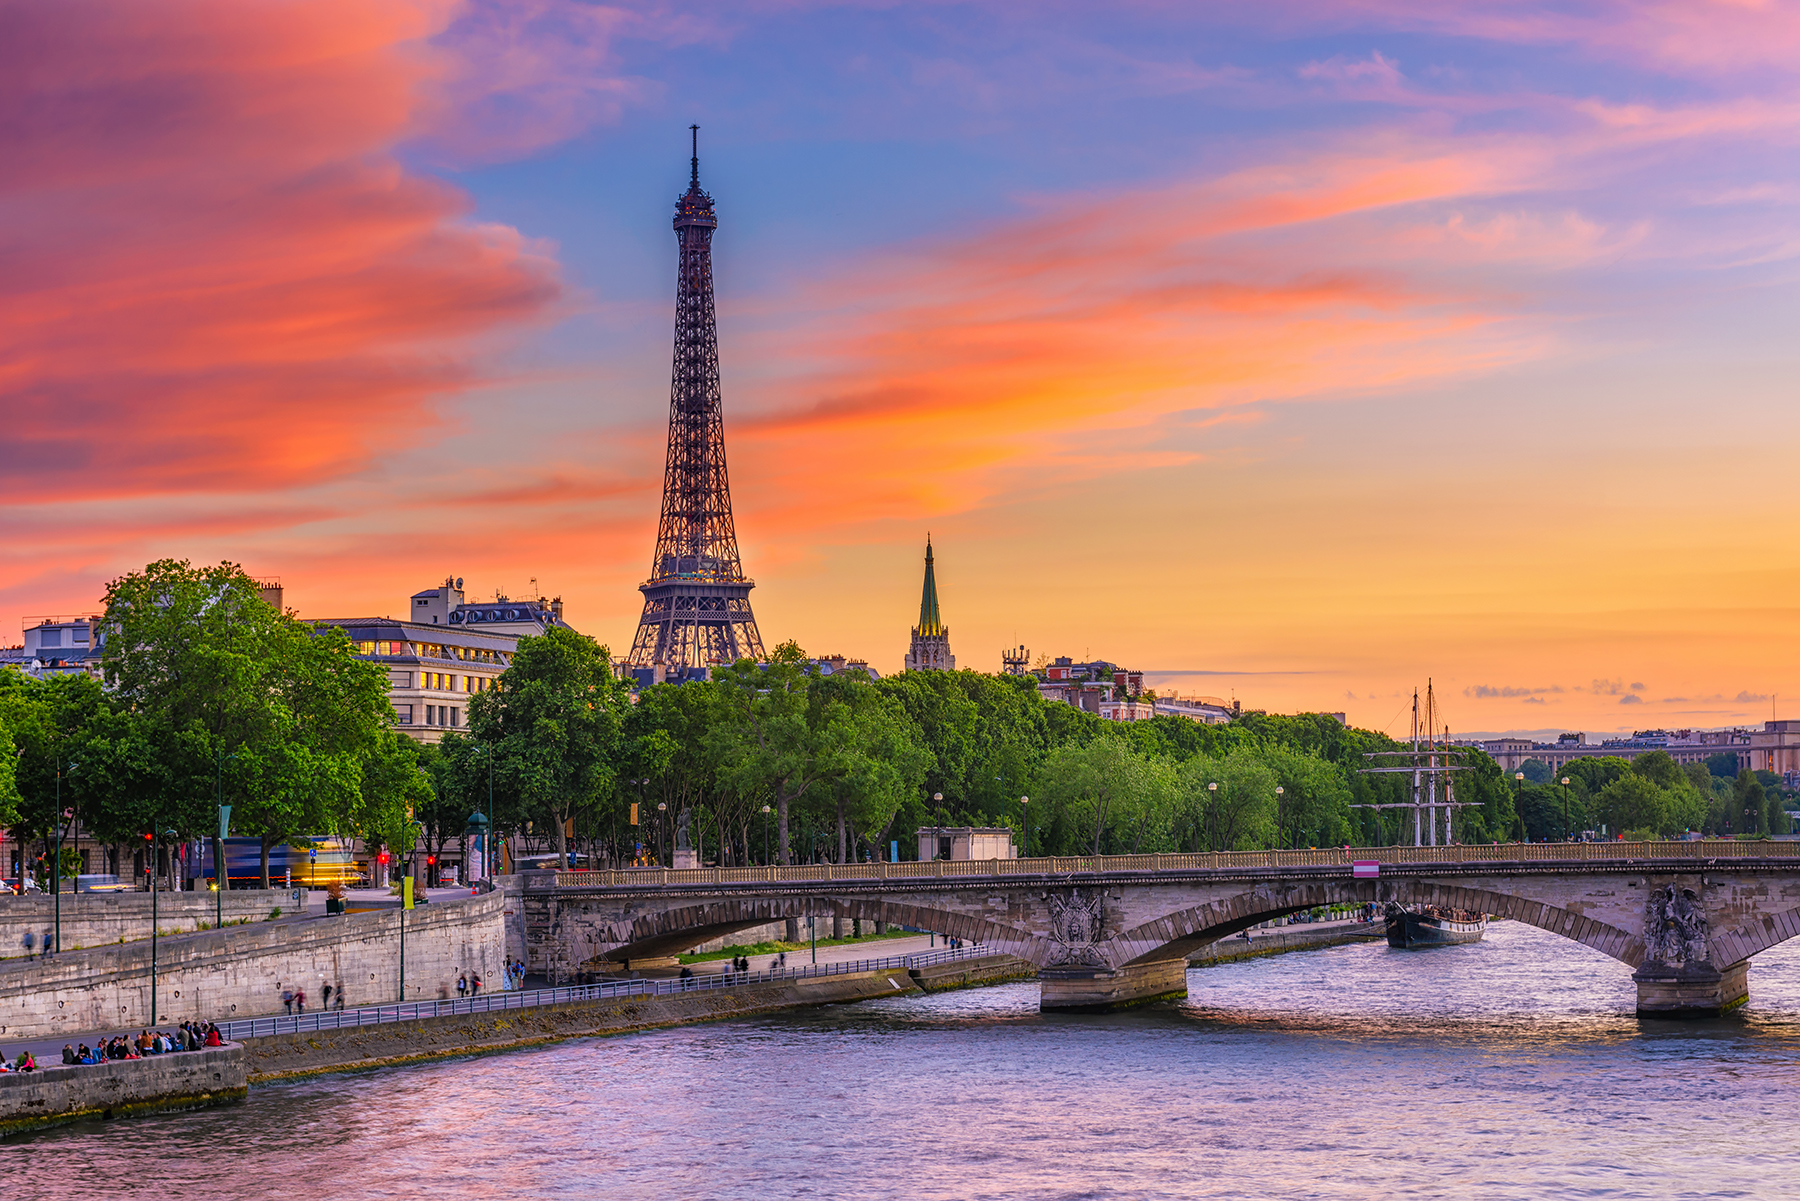 Sunset view of Eiffel tower and Seine river in Paris, France. Eiffel Tower is one of the most iconic landmarks of Paris. Cityscape of Paris.